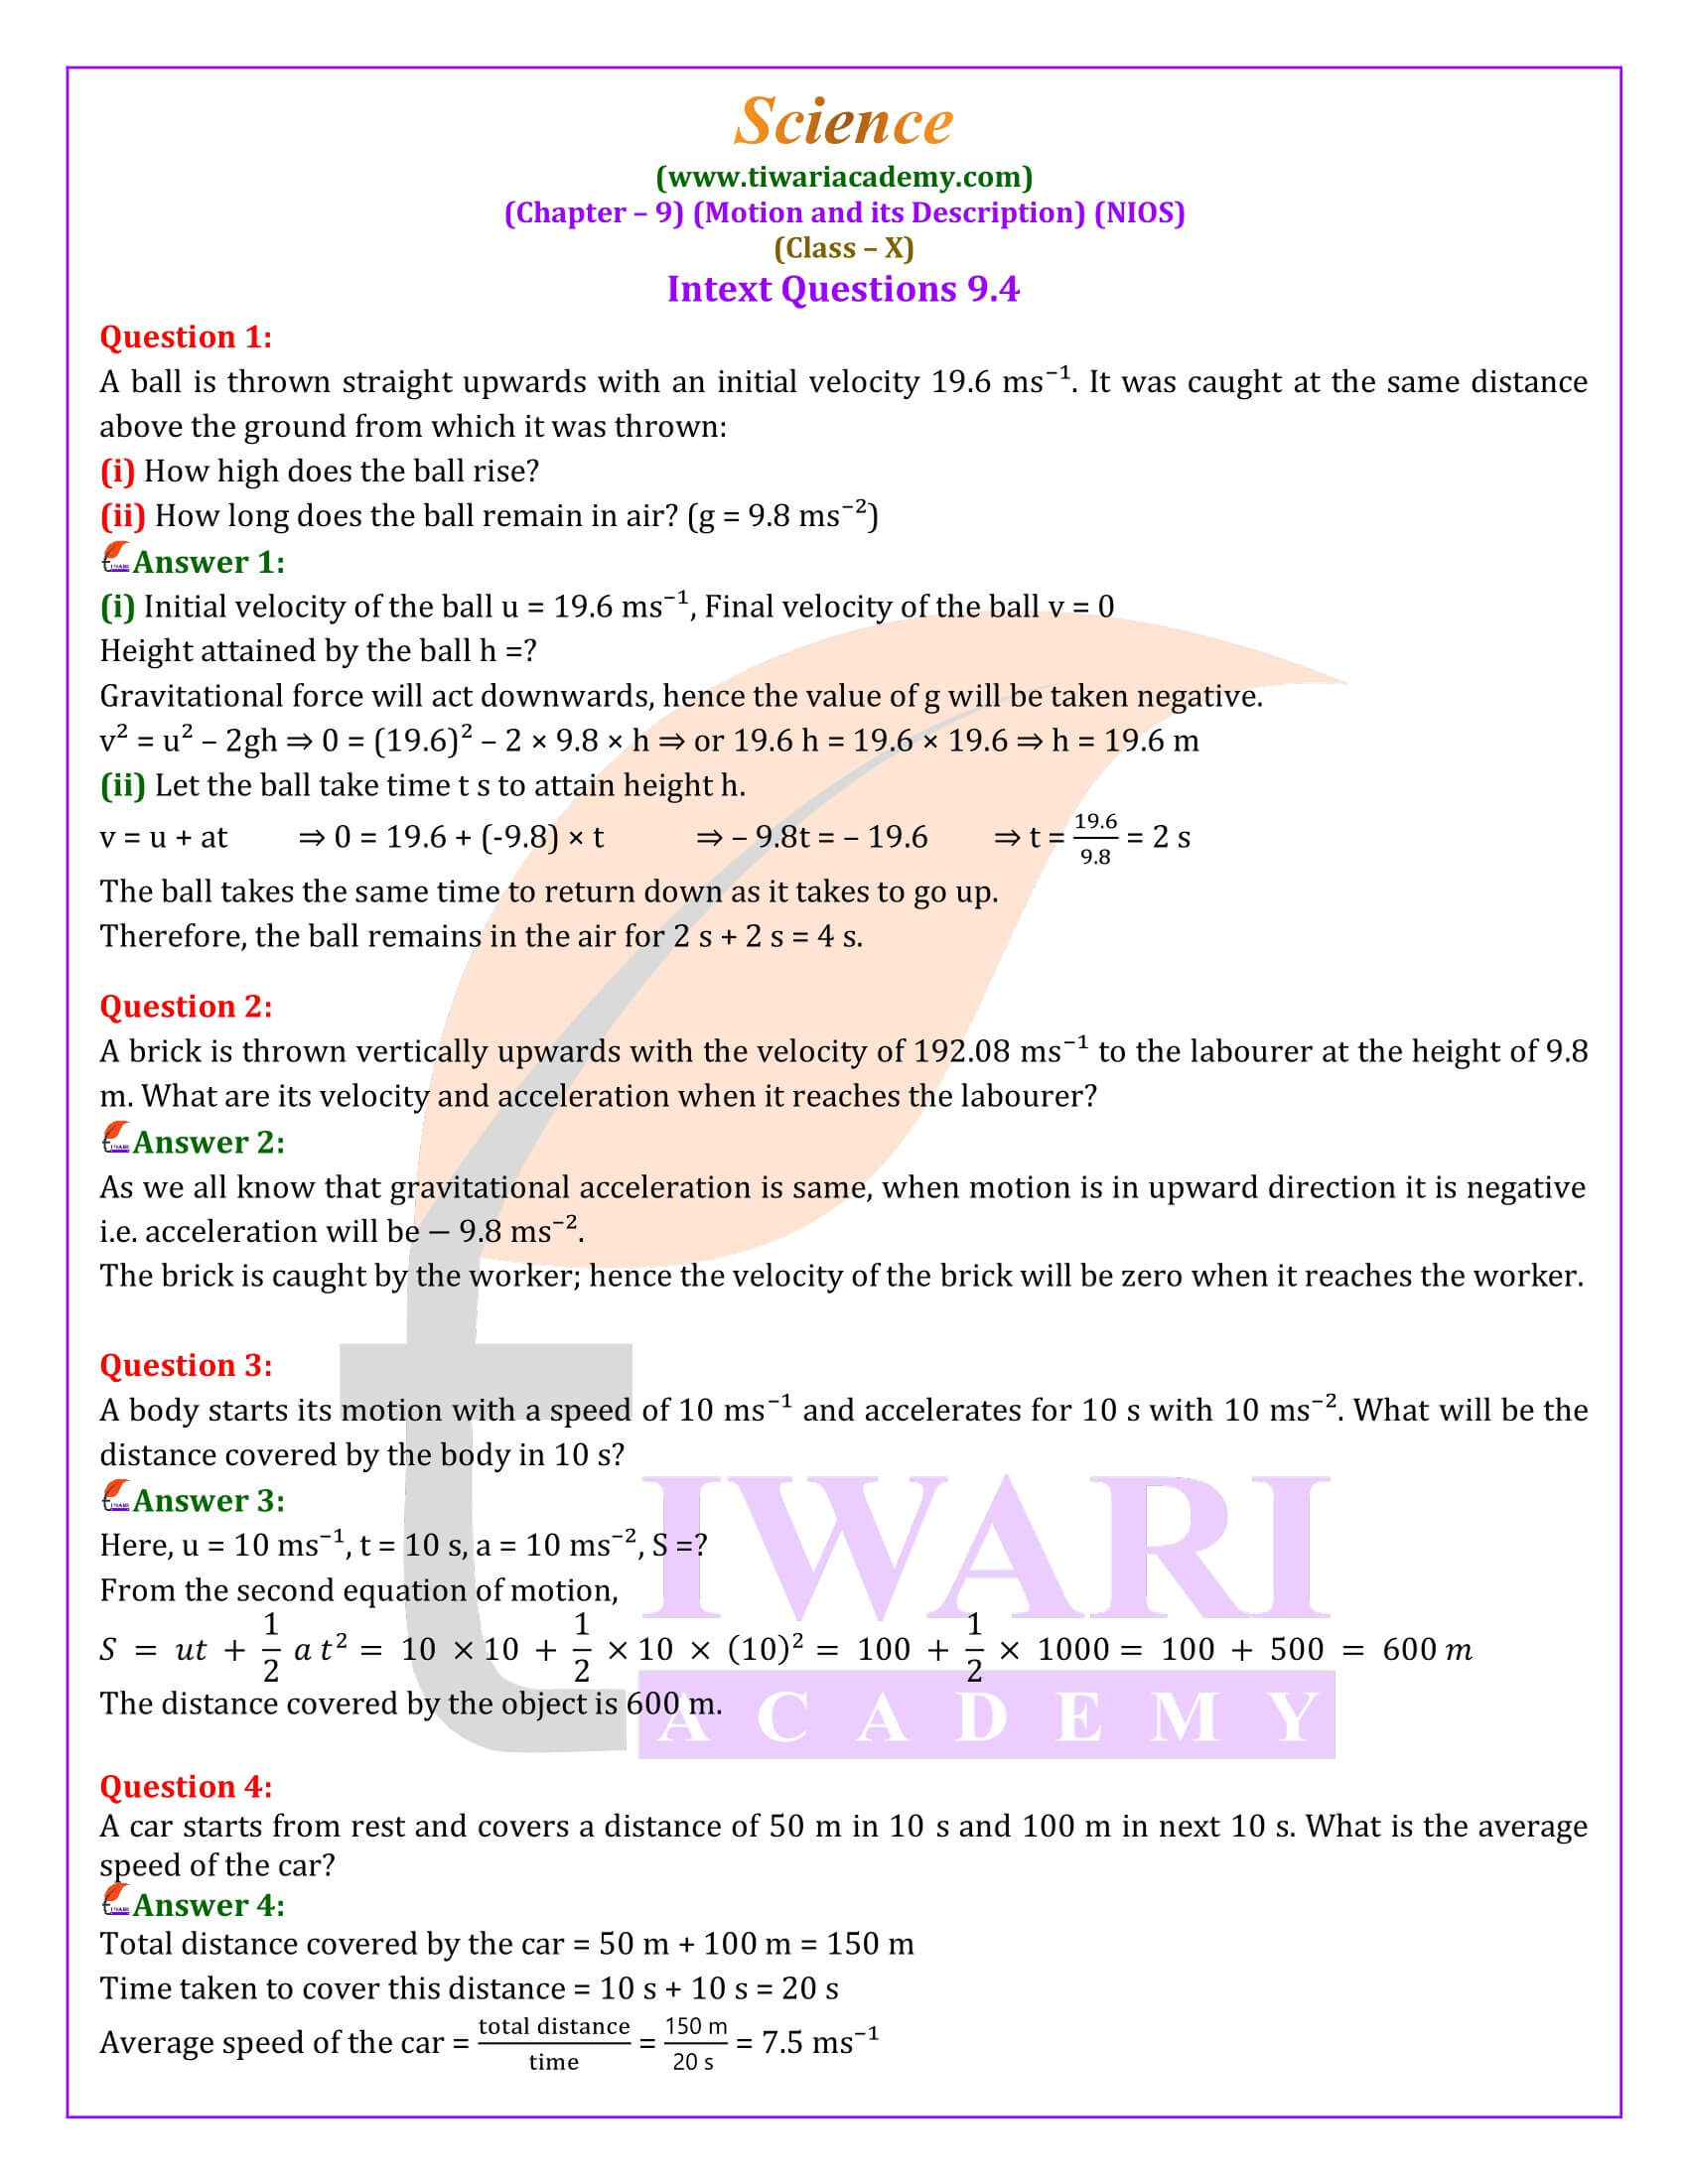 NIOS Class 10 Science Chapter 9 Solutions in Hindi